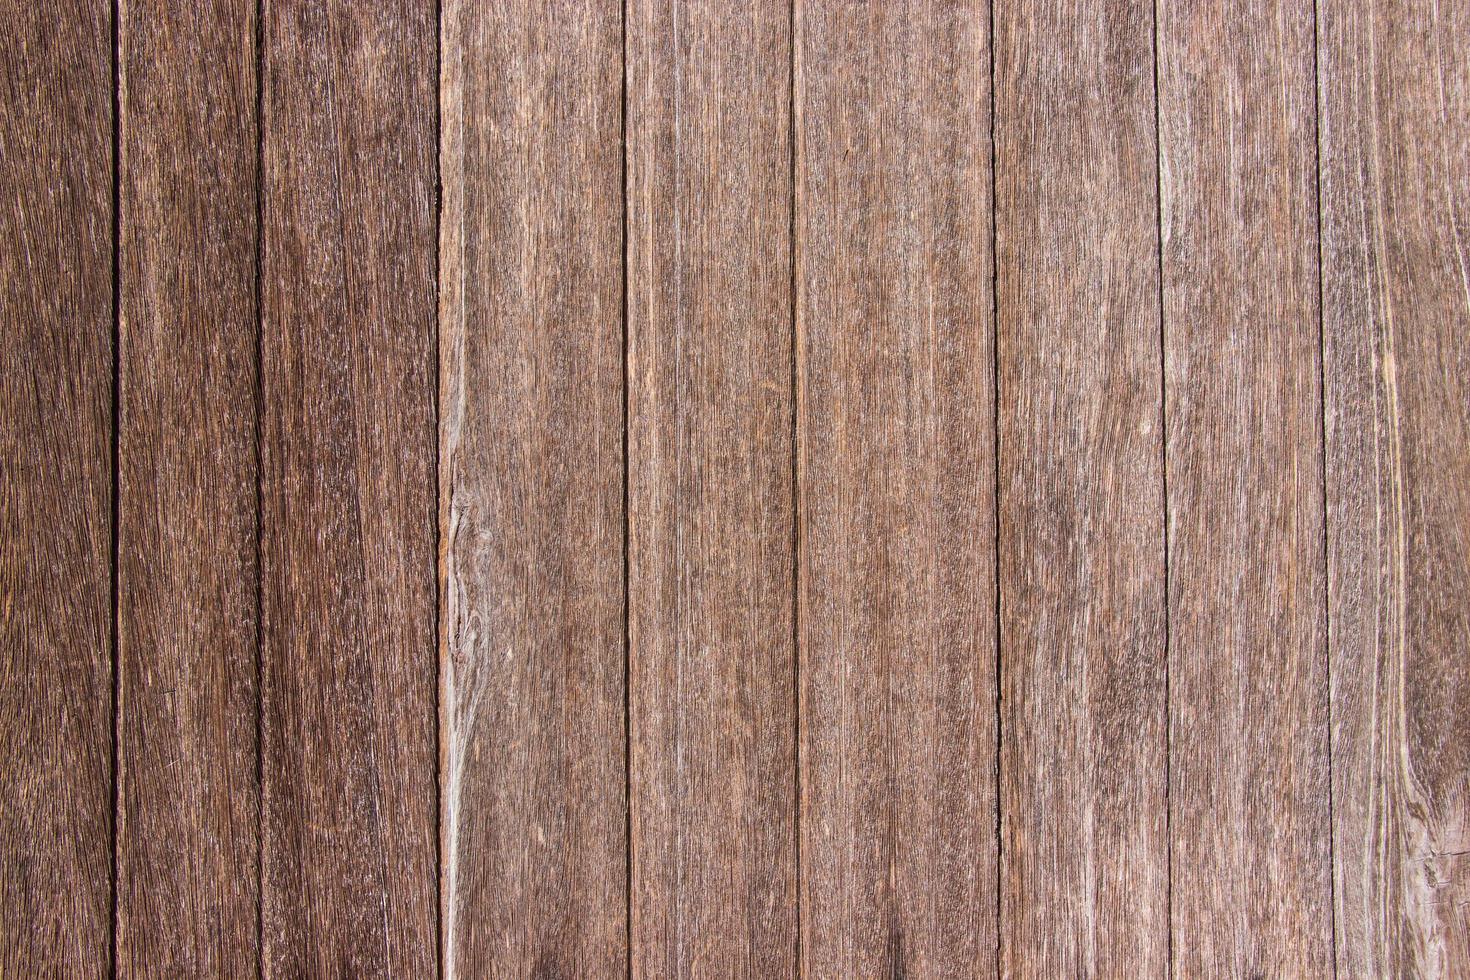 The surface of the brown natural wooden texture. Wood and wall background photo